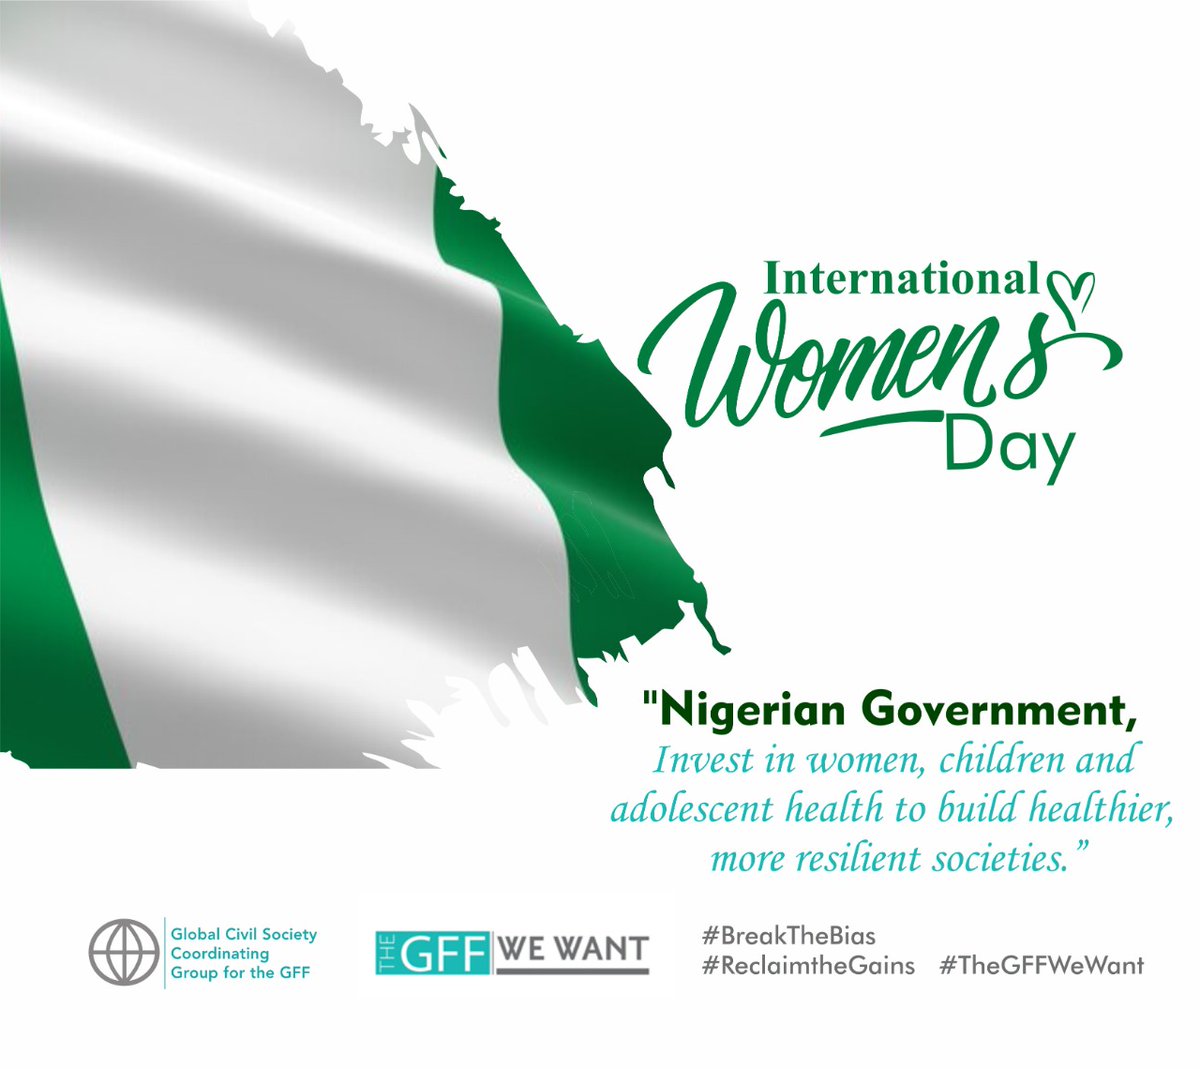 #BreakTheBias by challenging the barriers women and girls face accessing health services. #InternationalWomensDay @NhisNg @NphcdaNG @Fmohnigeria @theGFF @AHBNetwork @UHC_Day @WGHGermany @Wavaorg